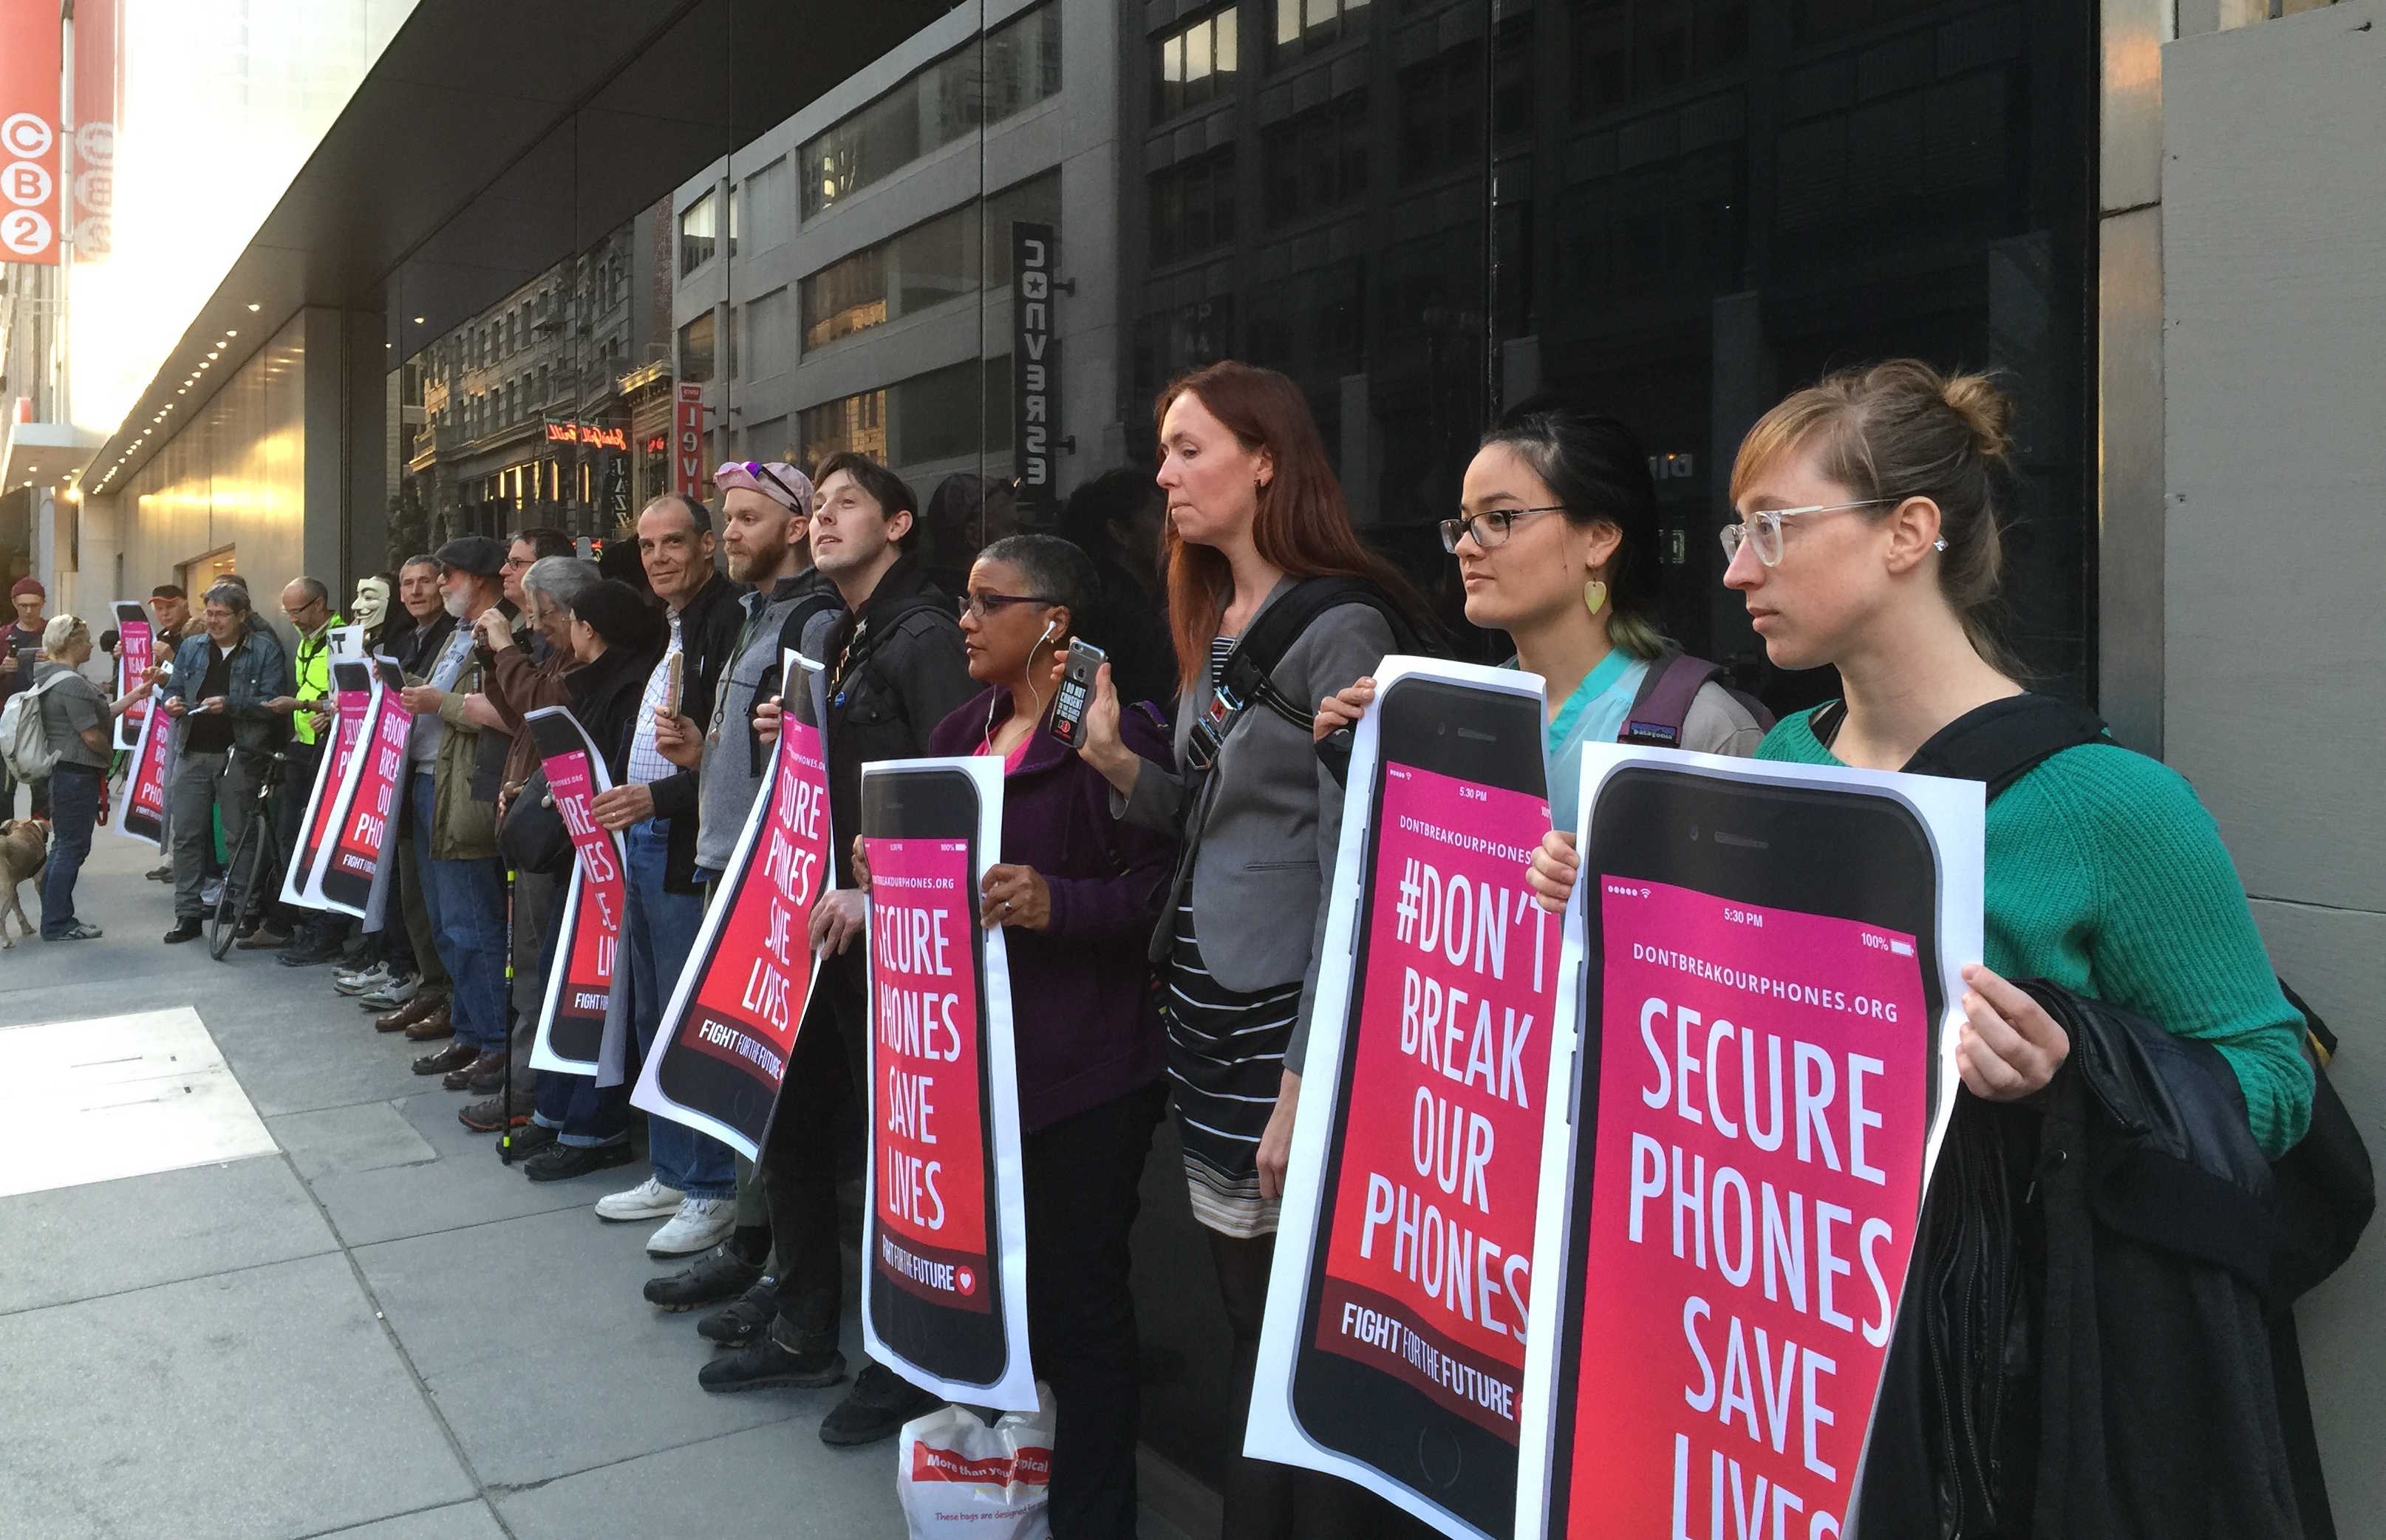 Protesters in San Francisco line up with pro-privacy signs outside the downtown Apple Store.